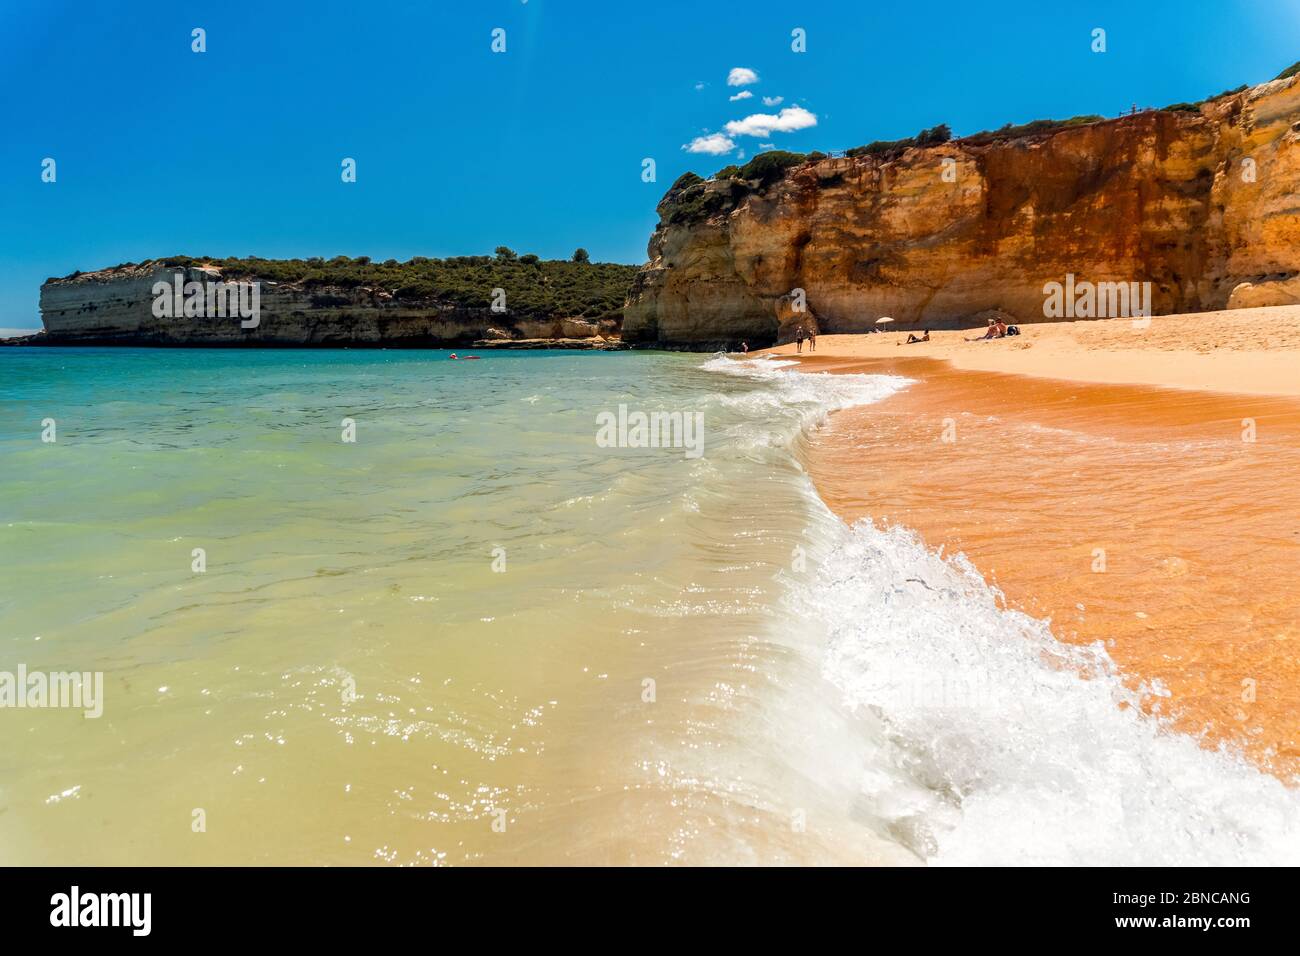 Algarve Postcard High Resolution Stock Photography and Images - Alamy